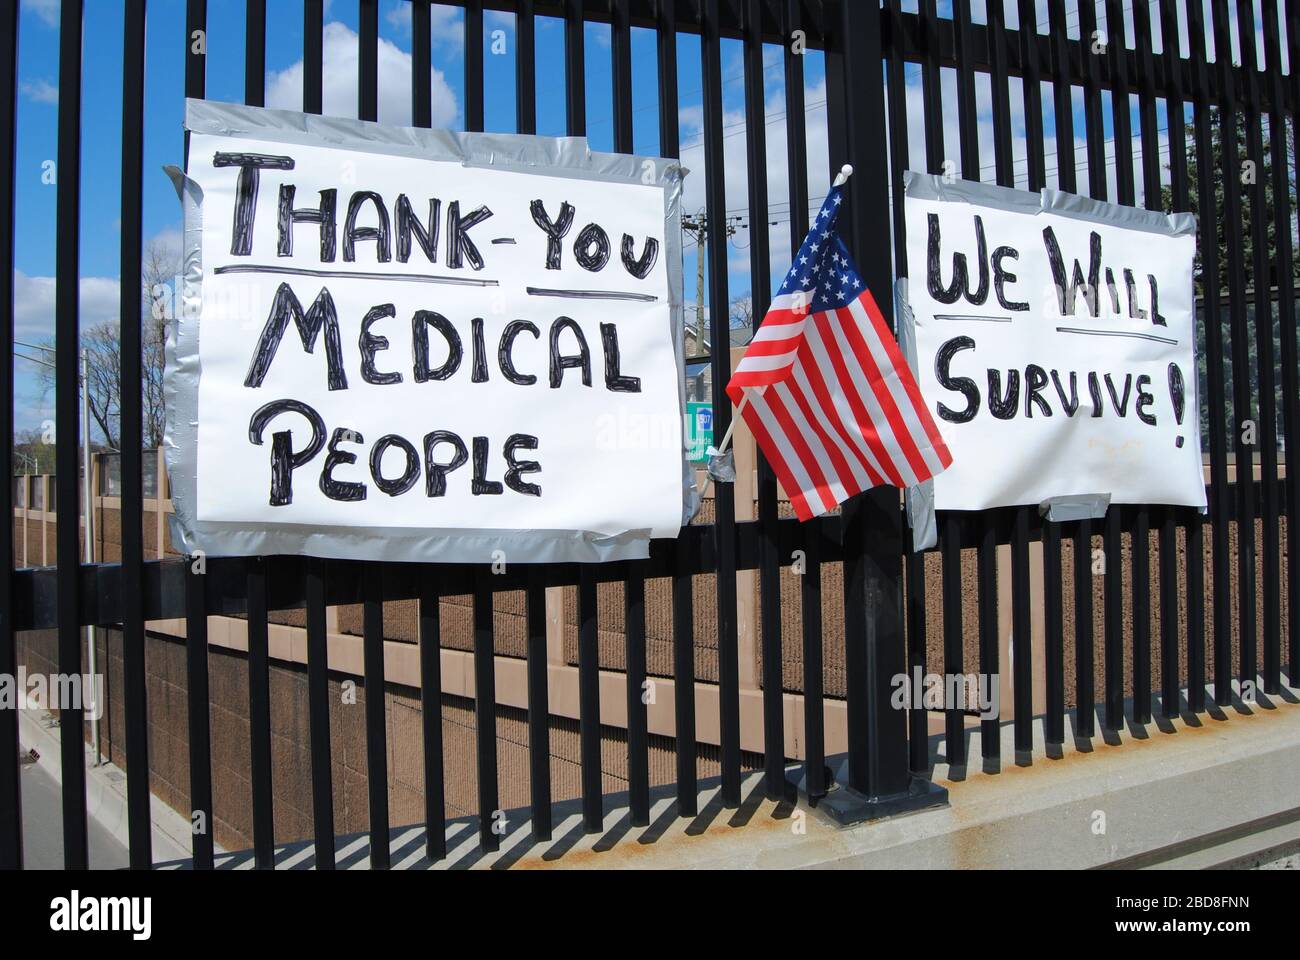 Rutherford, New Jersey / USA - April 01 2020: Signs of thanks and encouragement amid the novel coronavirus (COVID-19) pandemic. Stock Photo